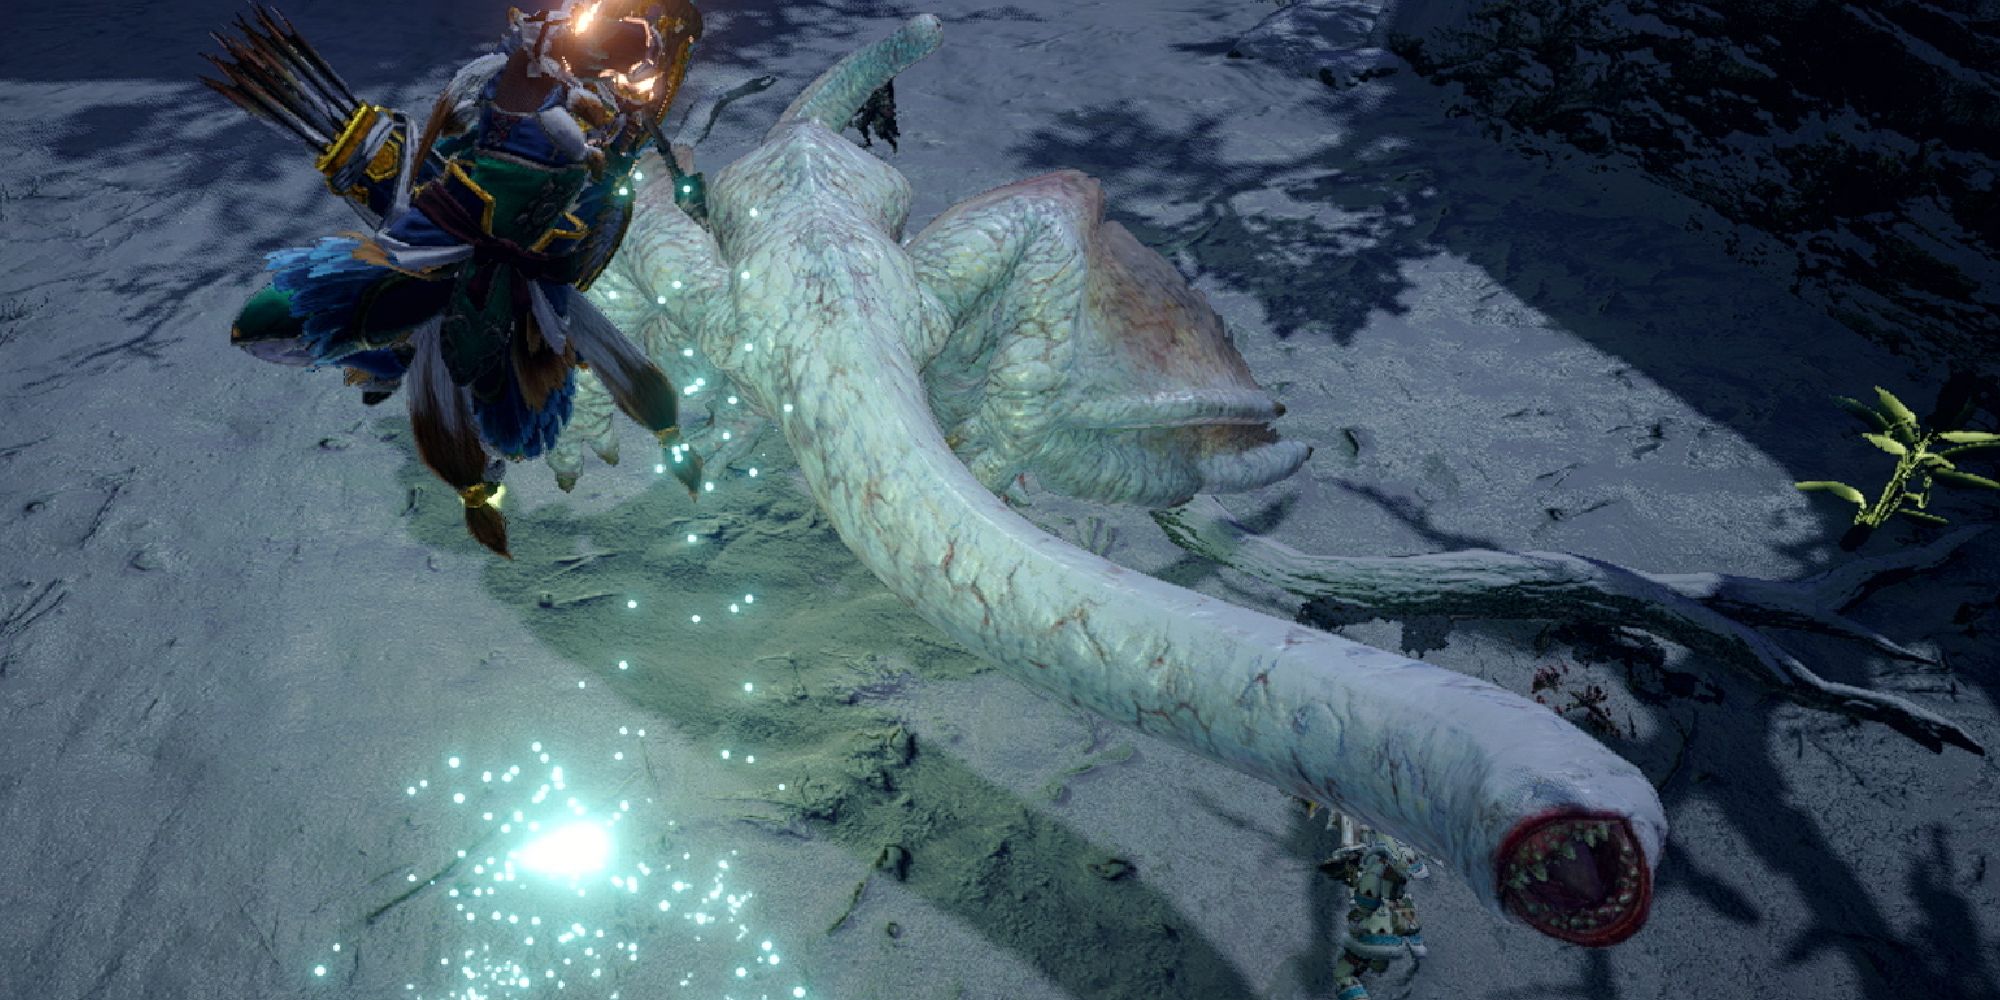 A Bow Hunter attacking a Khezu from mid-air